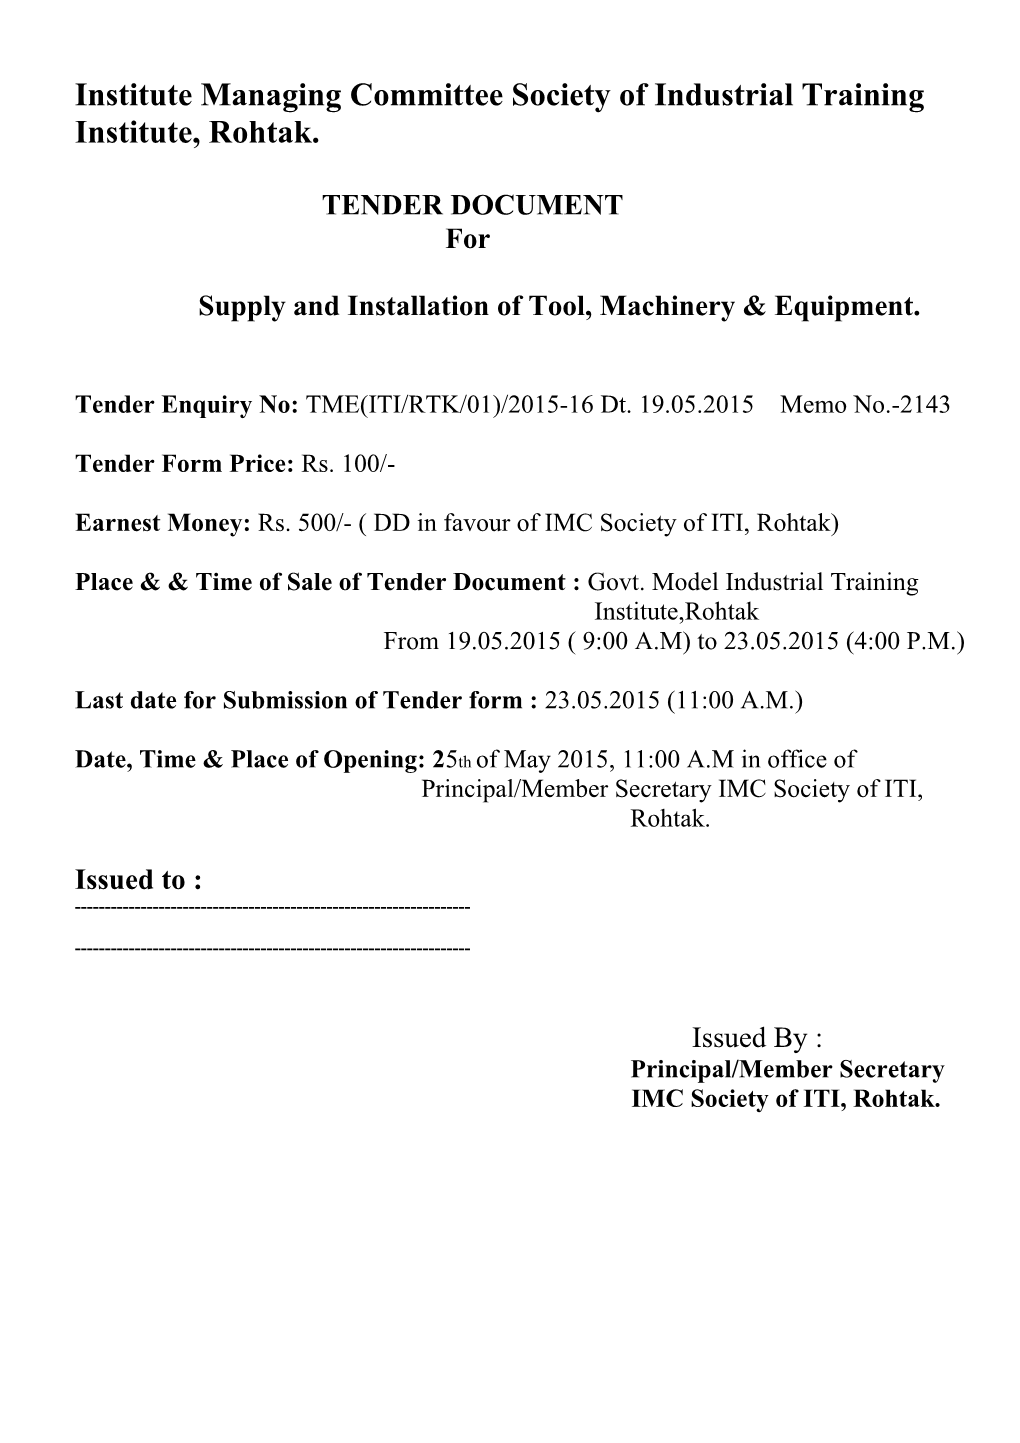 Supply and Installation of Tool, Machinery & Equipment